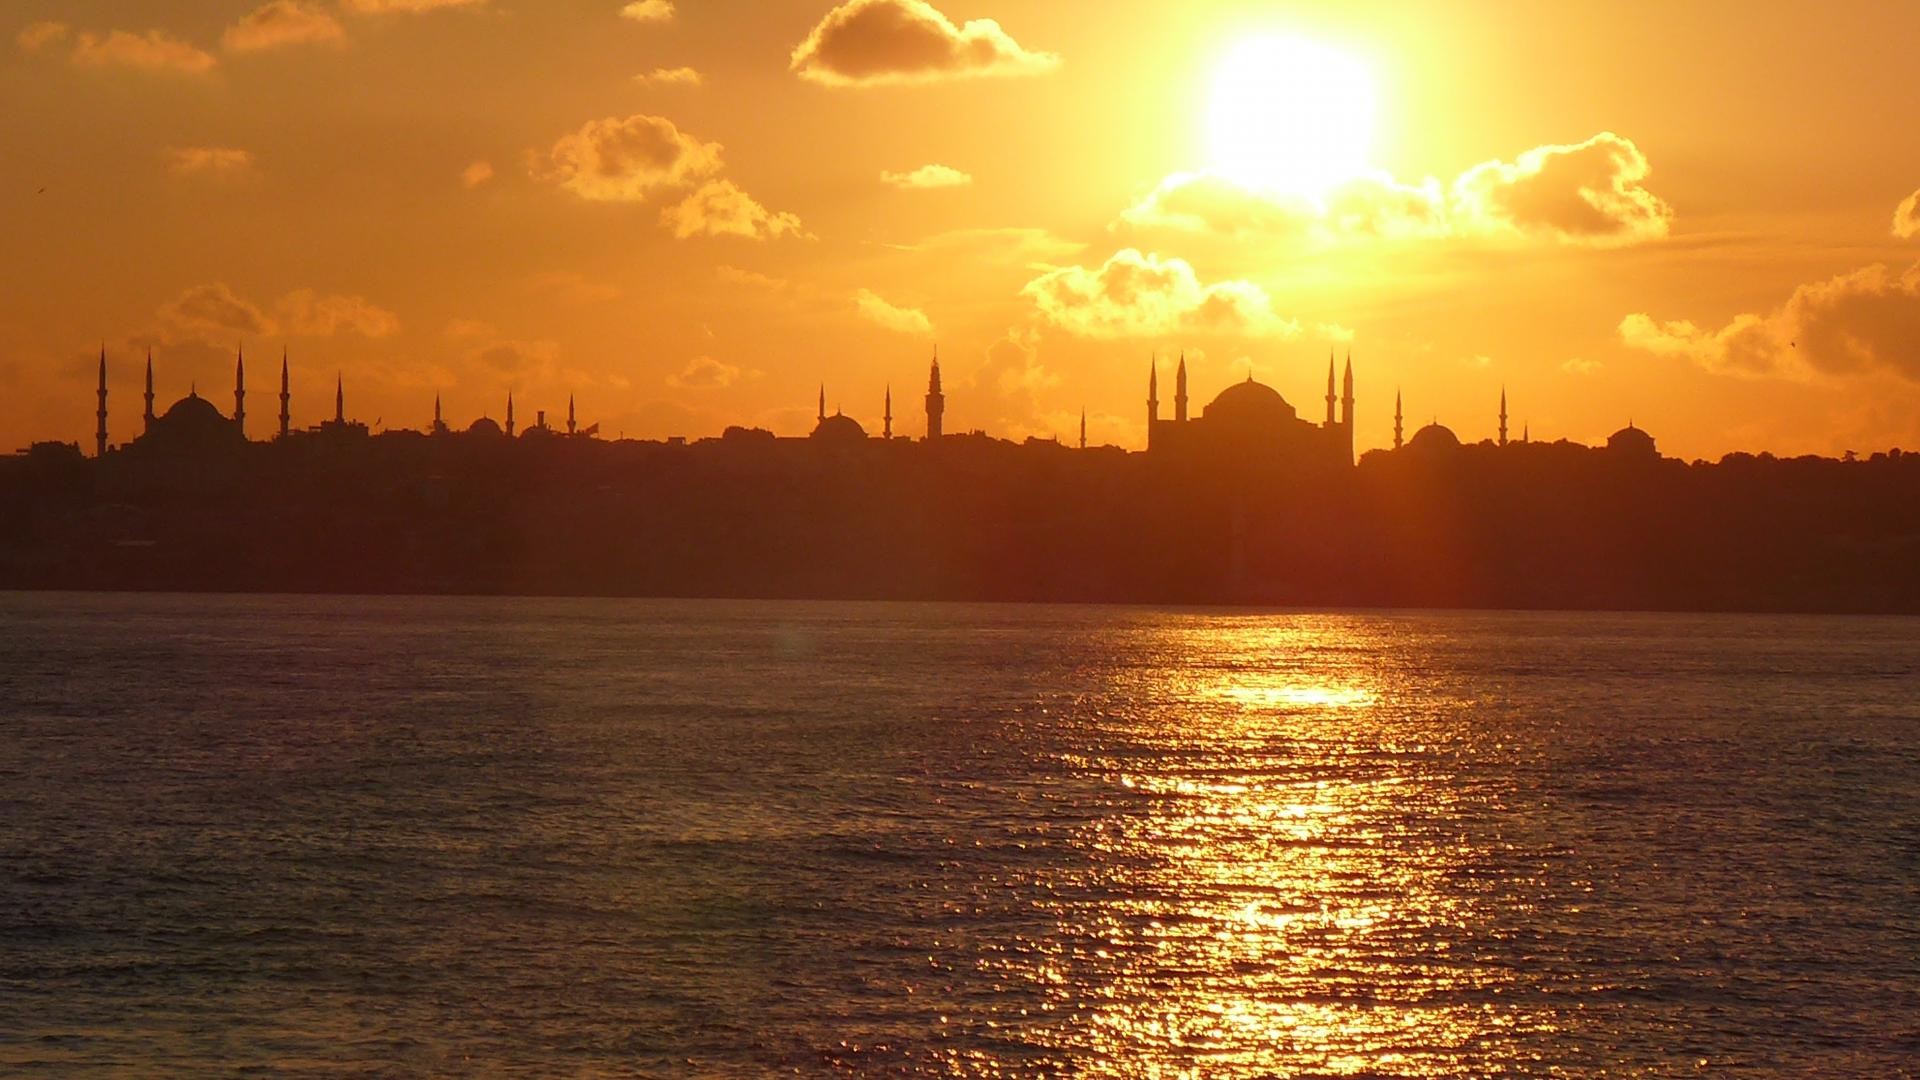 Columbia Students to Study and Experience Istanbul’s History, Monuments and Urban Life through the Columbia-Bogaziçi Summer School in Byzantine and Ottoman Studies